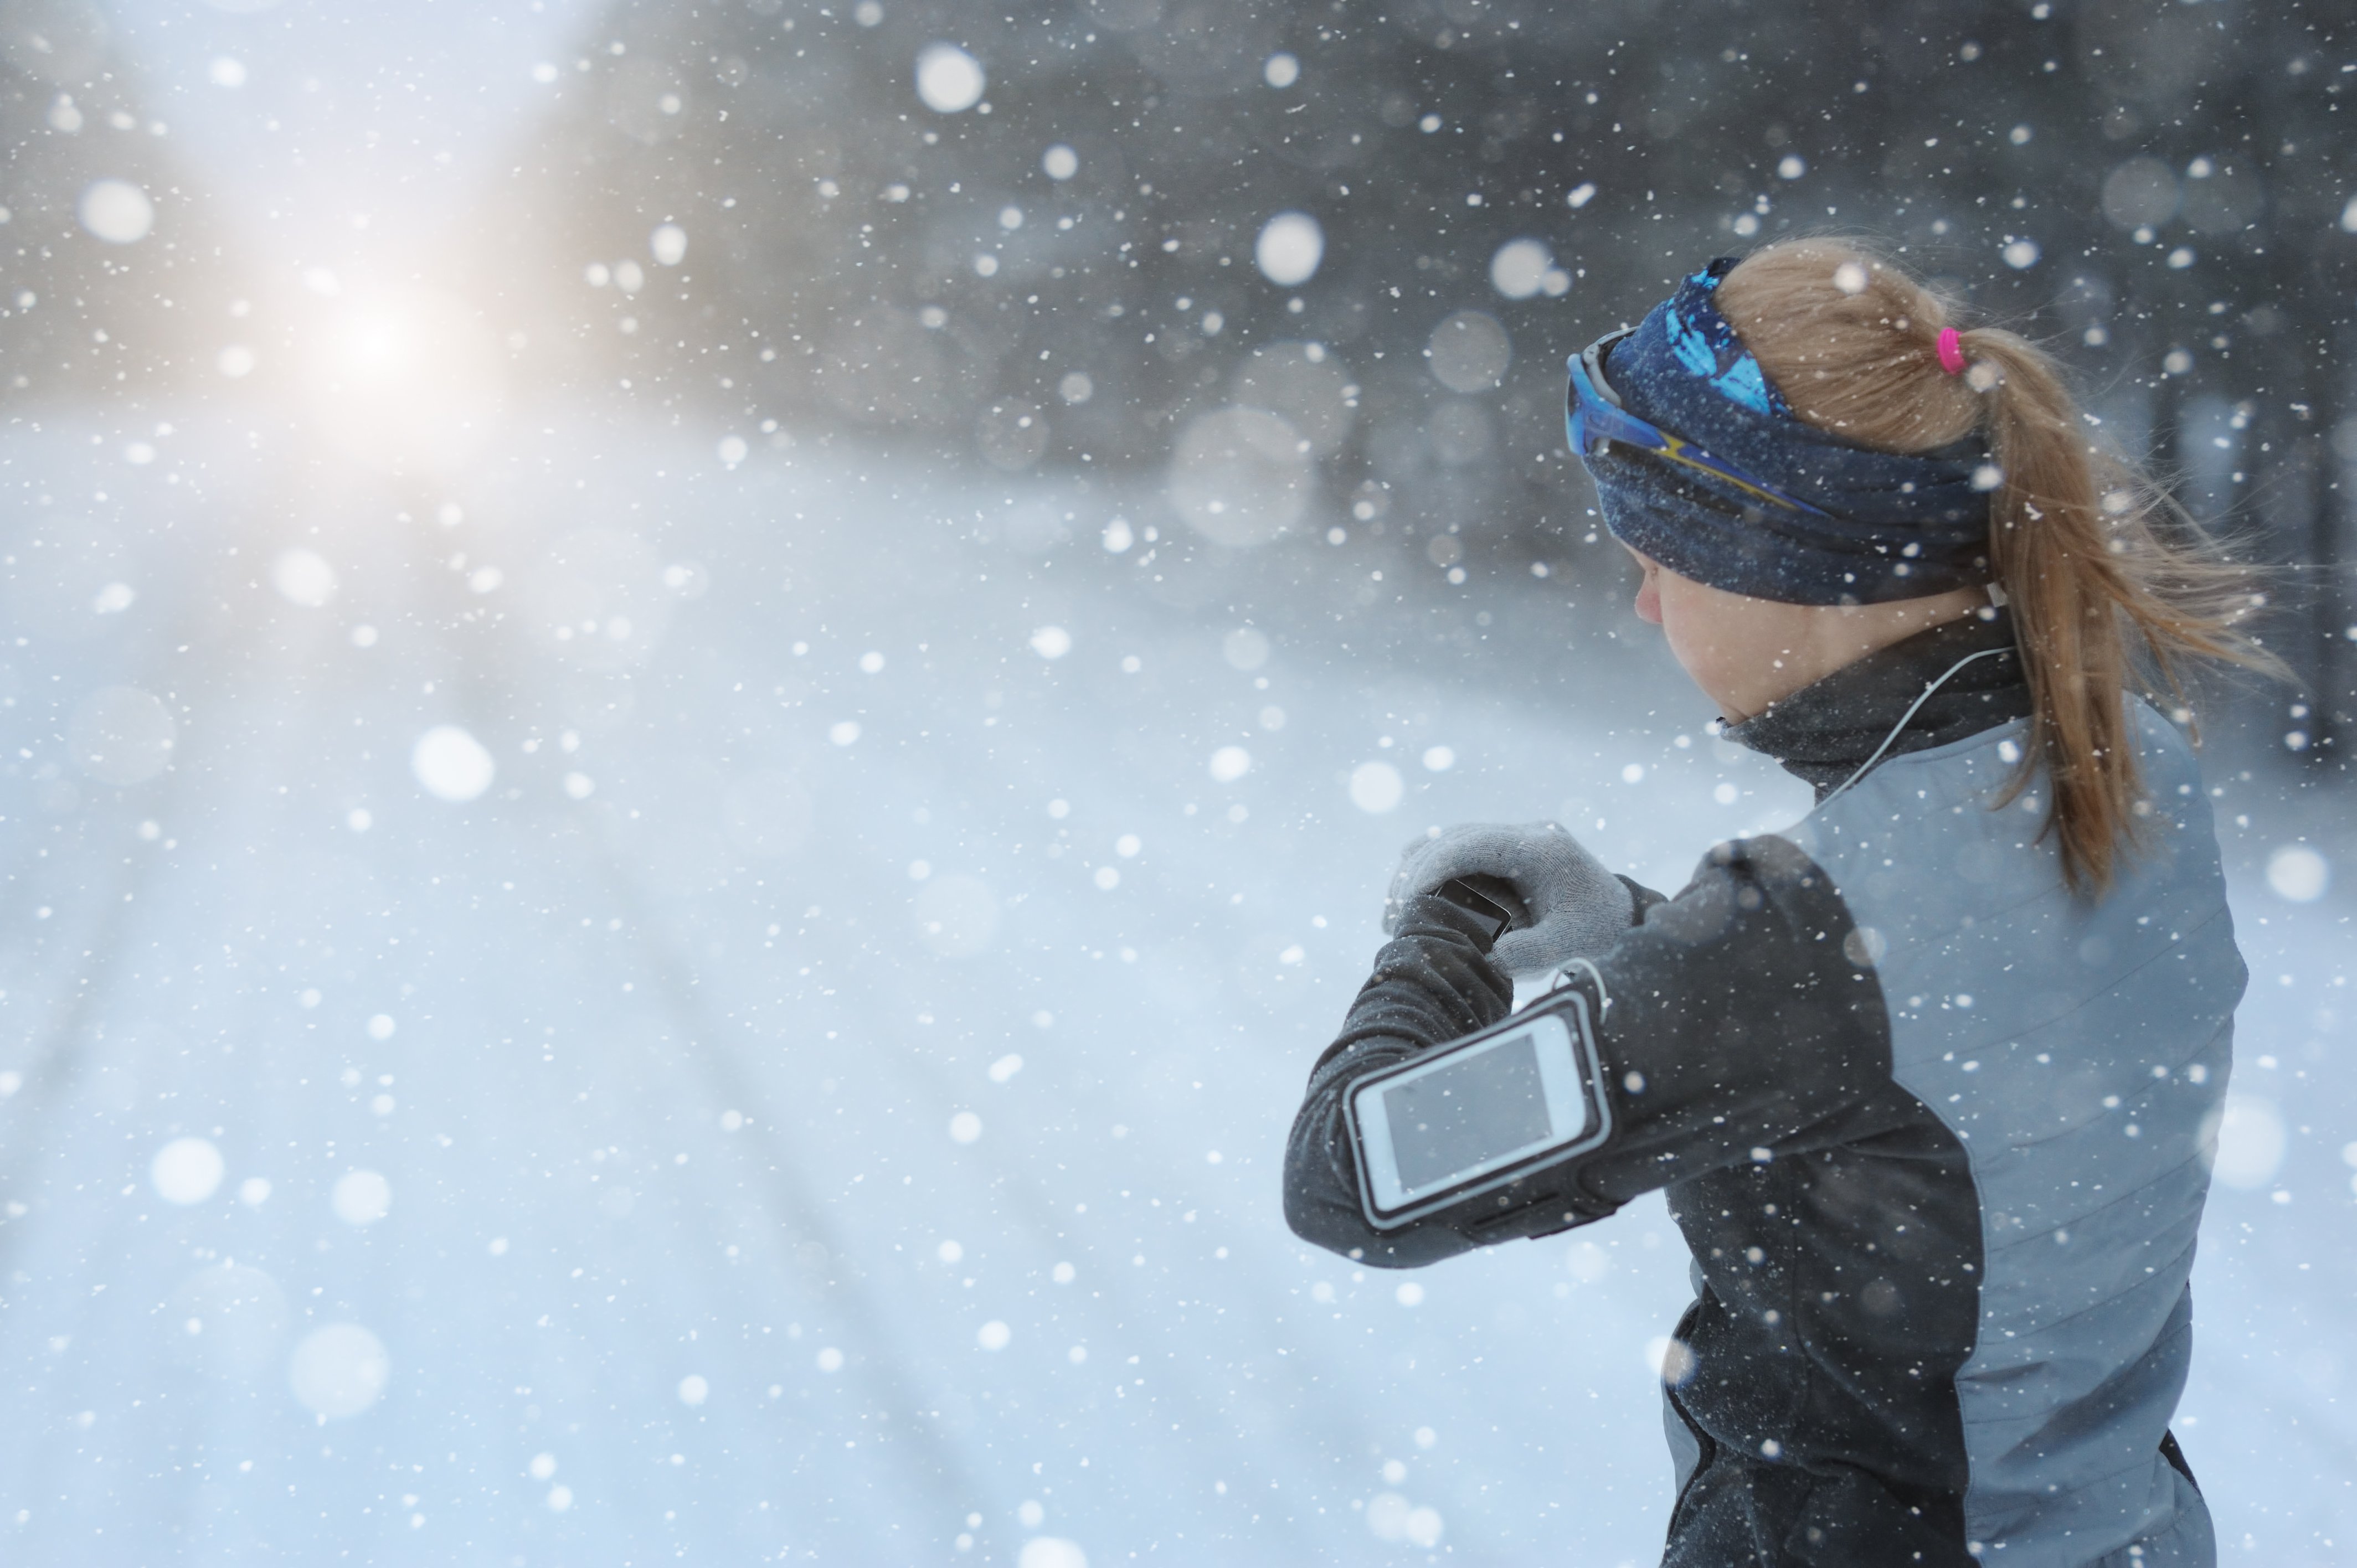 Runner wearing smart phone and watch in snowy conditions